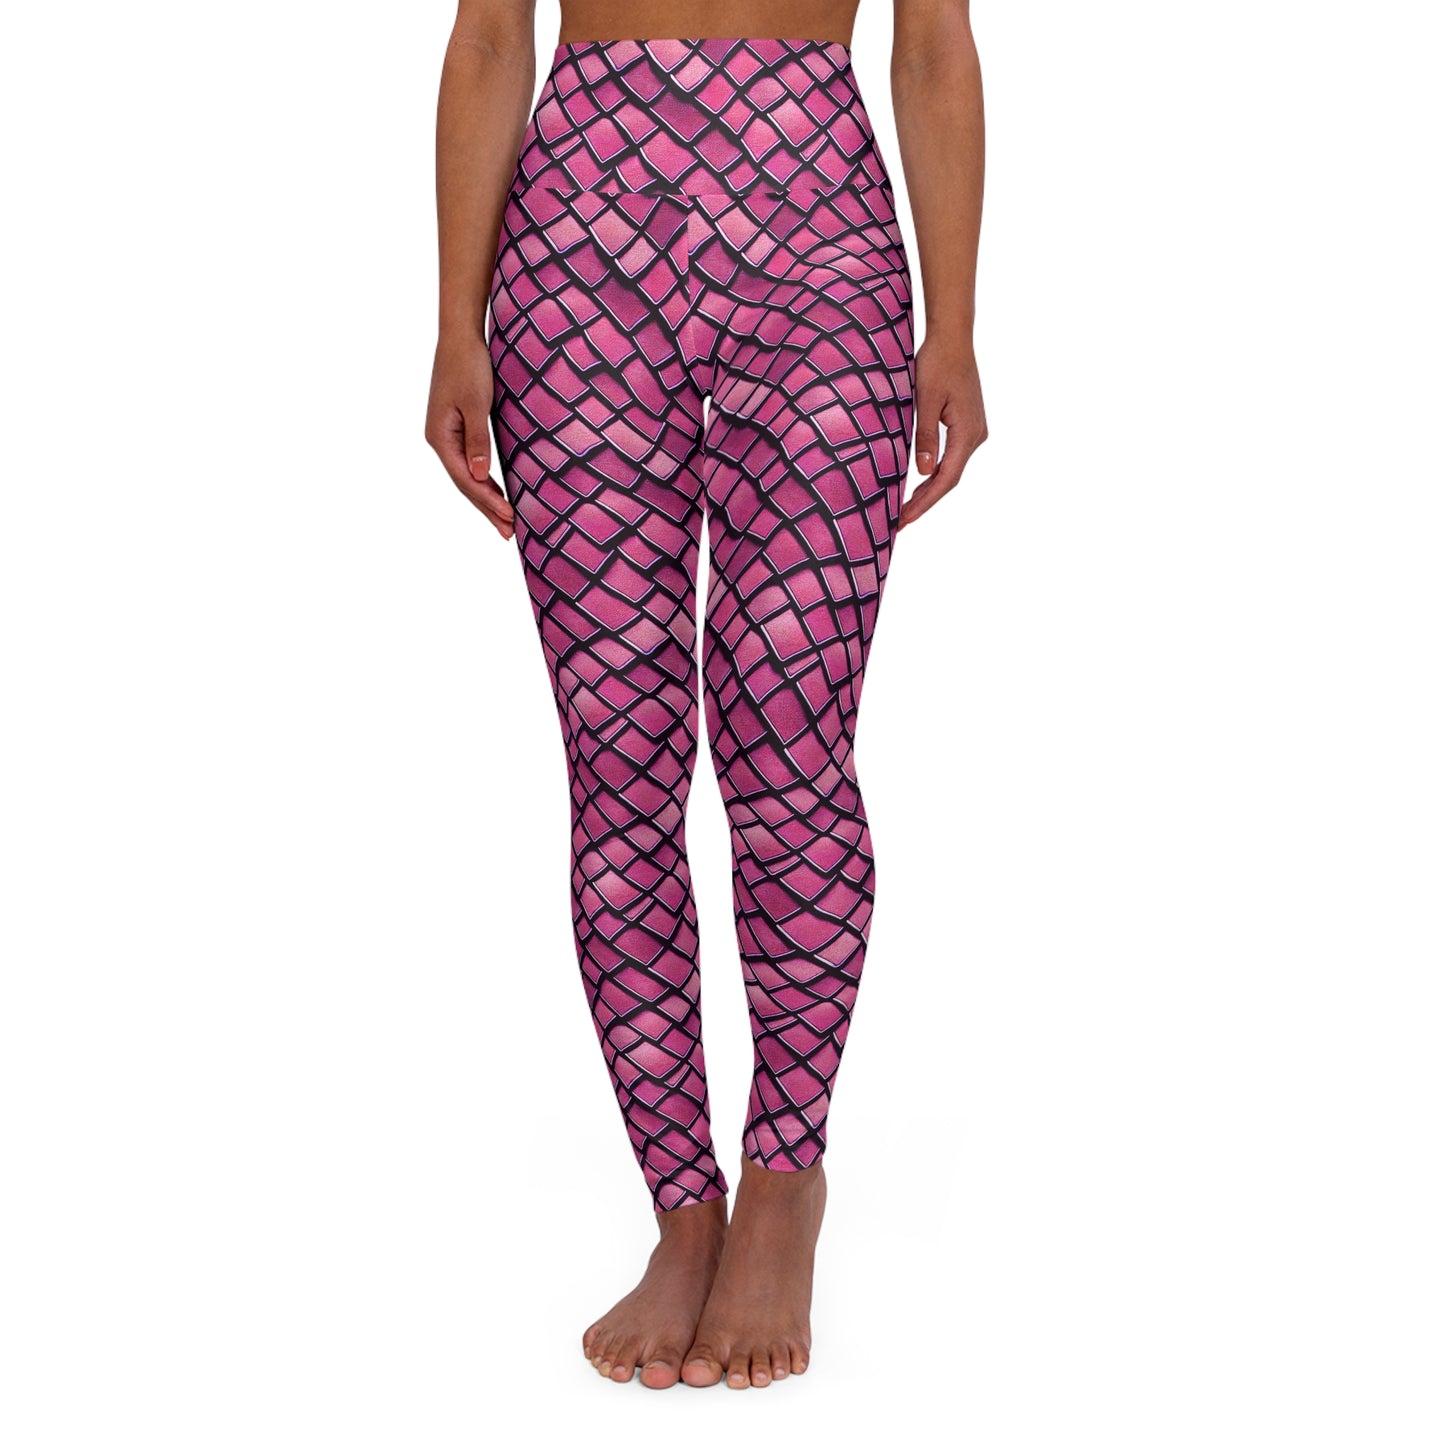 Dive into Enchantment with Pink Dragon Scale Mermaid Yoga Leggings Embrace the Magic of the Ocean! High Waisted Yoga Leggings, Beach, Pool